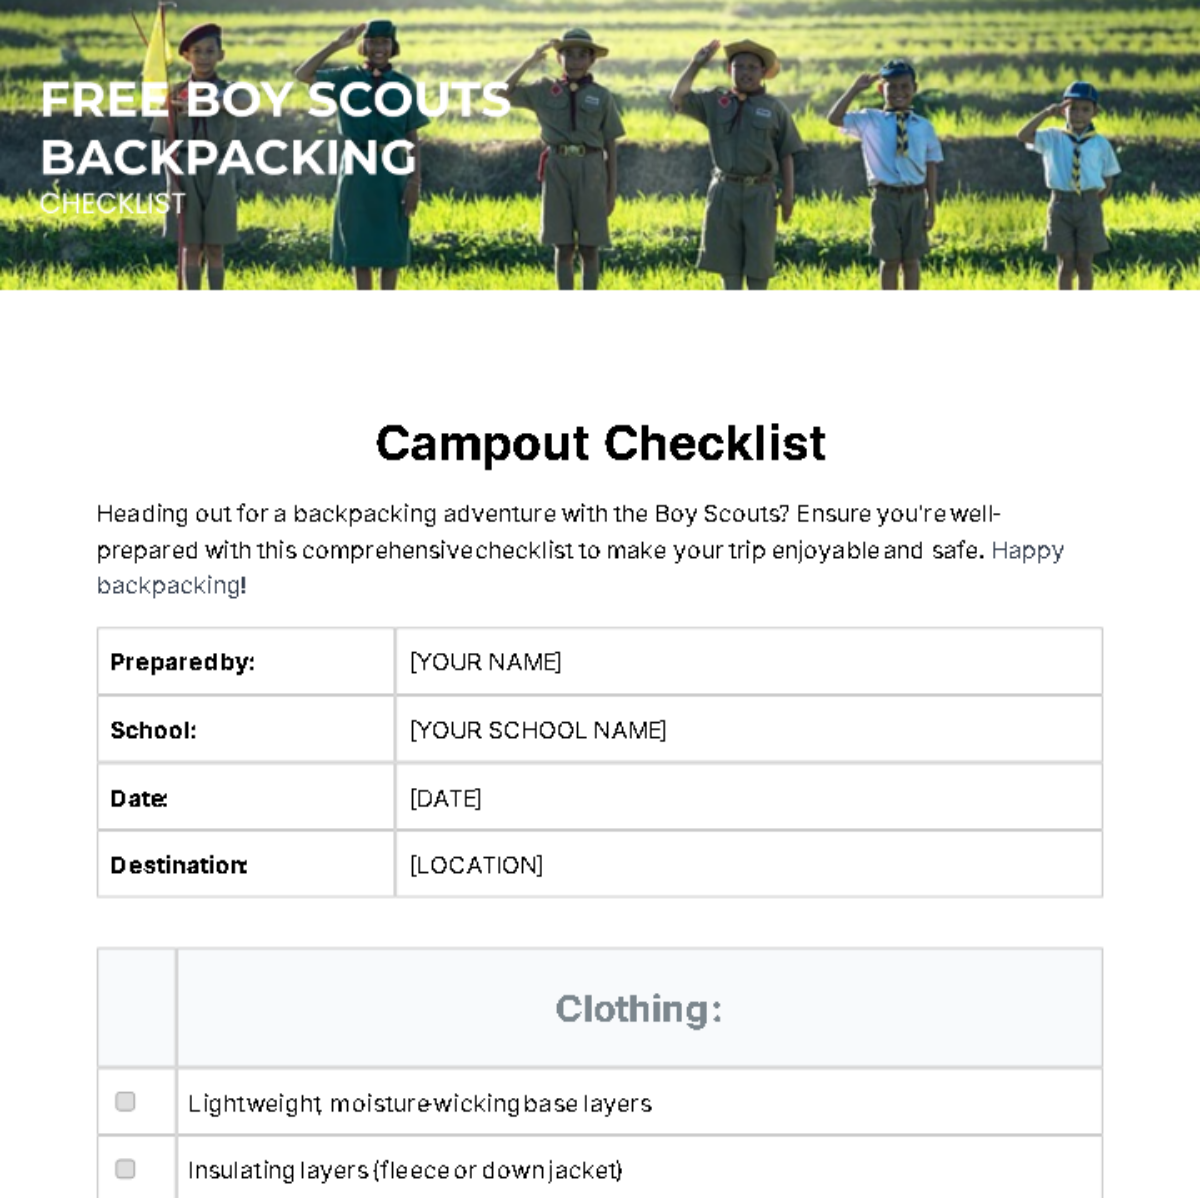 Free Boy Scouts Backpacking Checklist Template